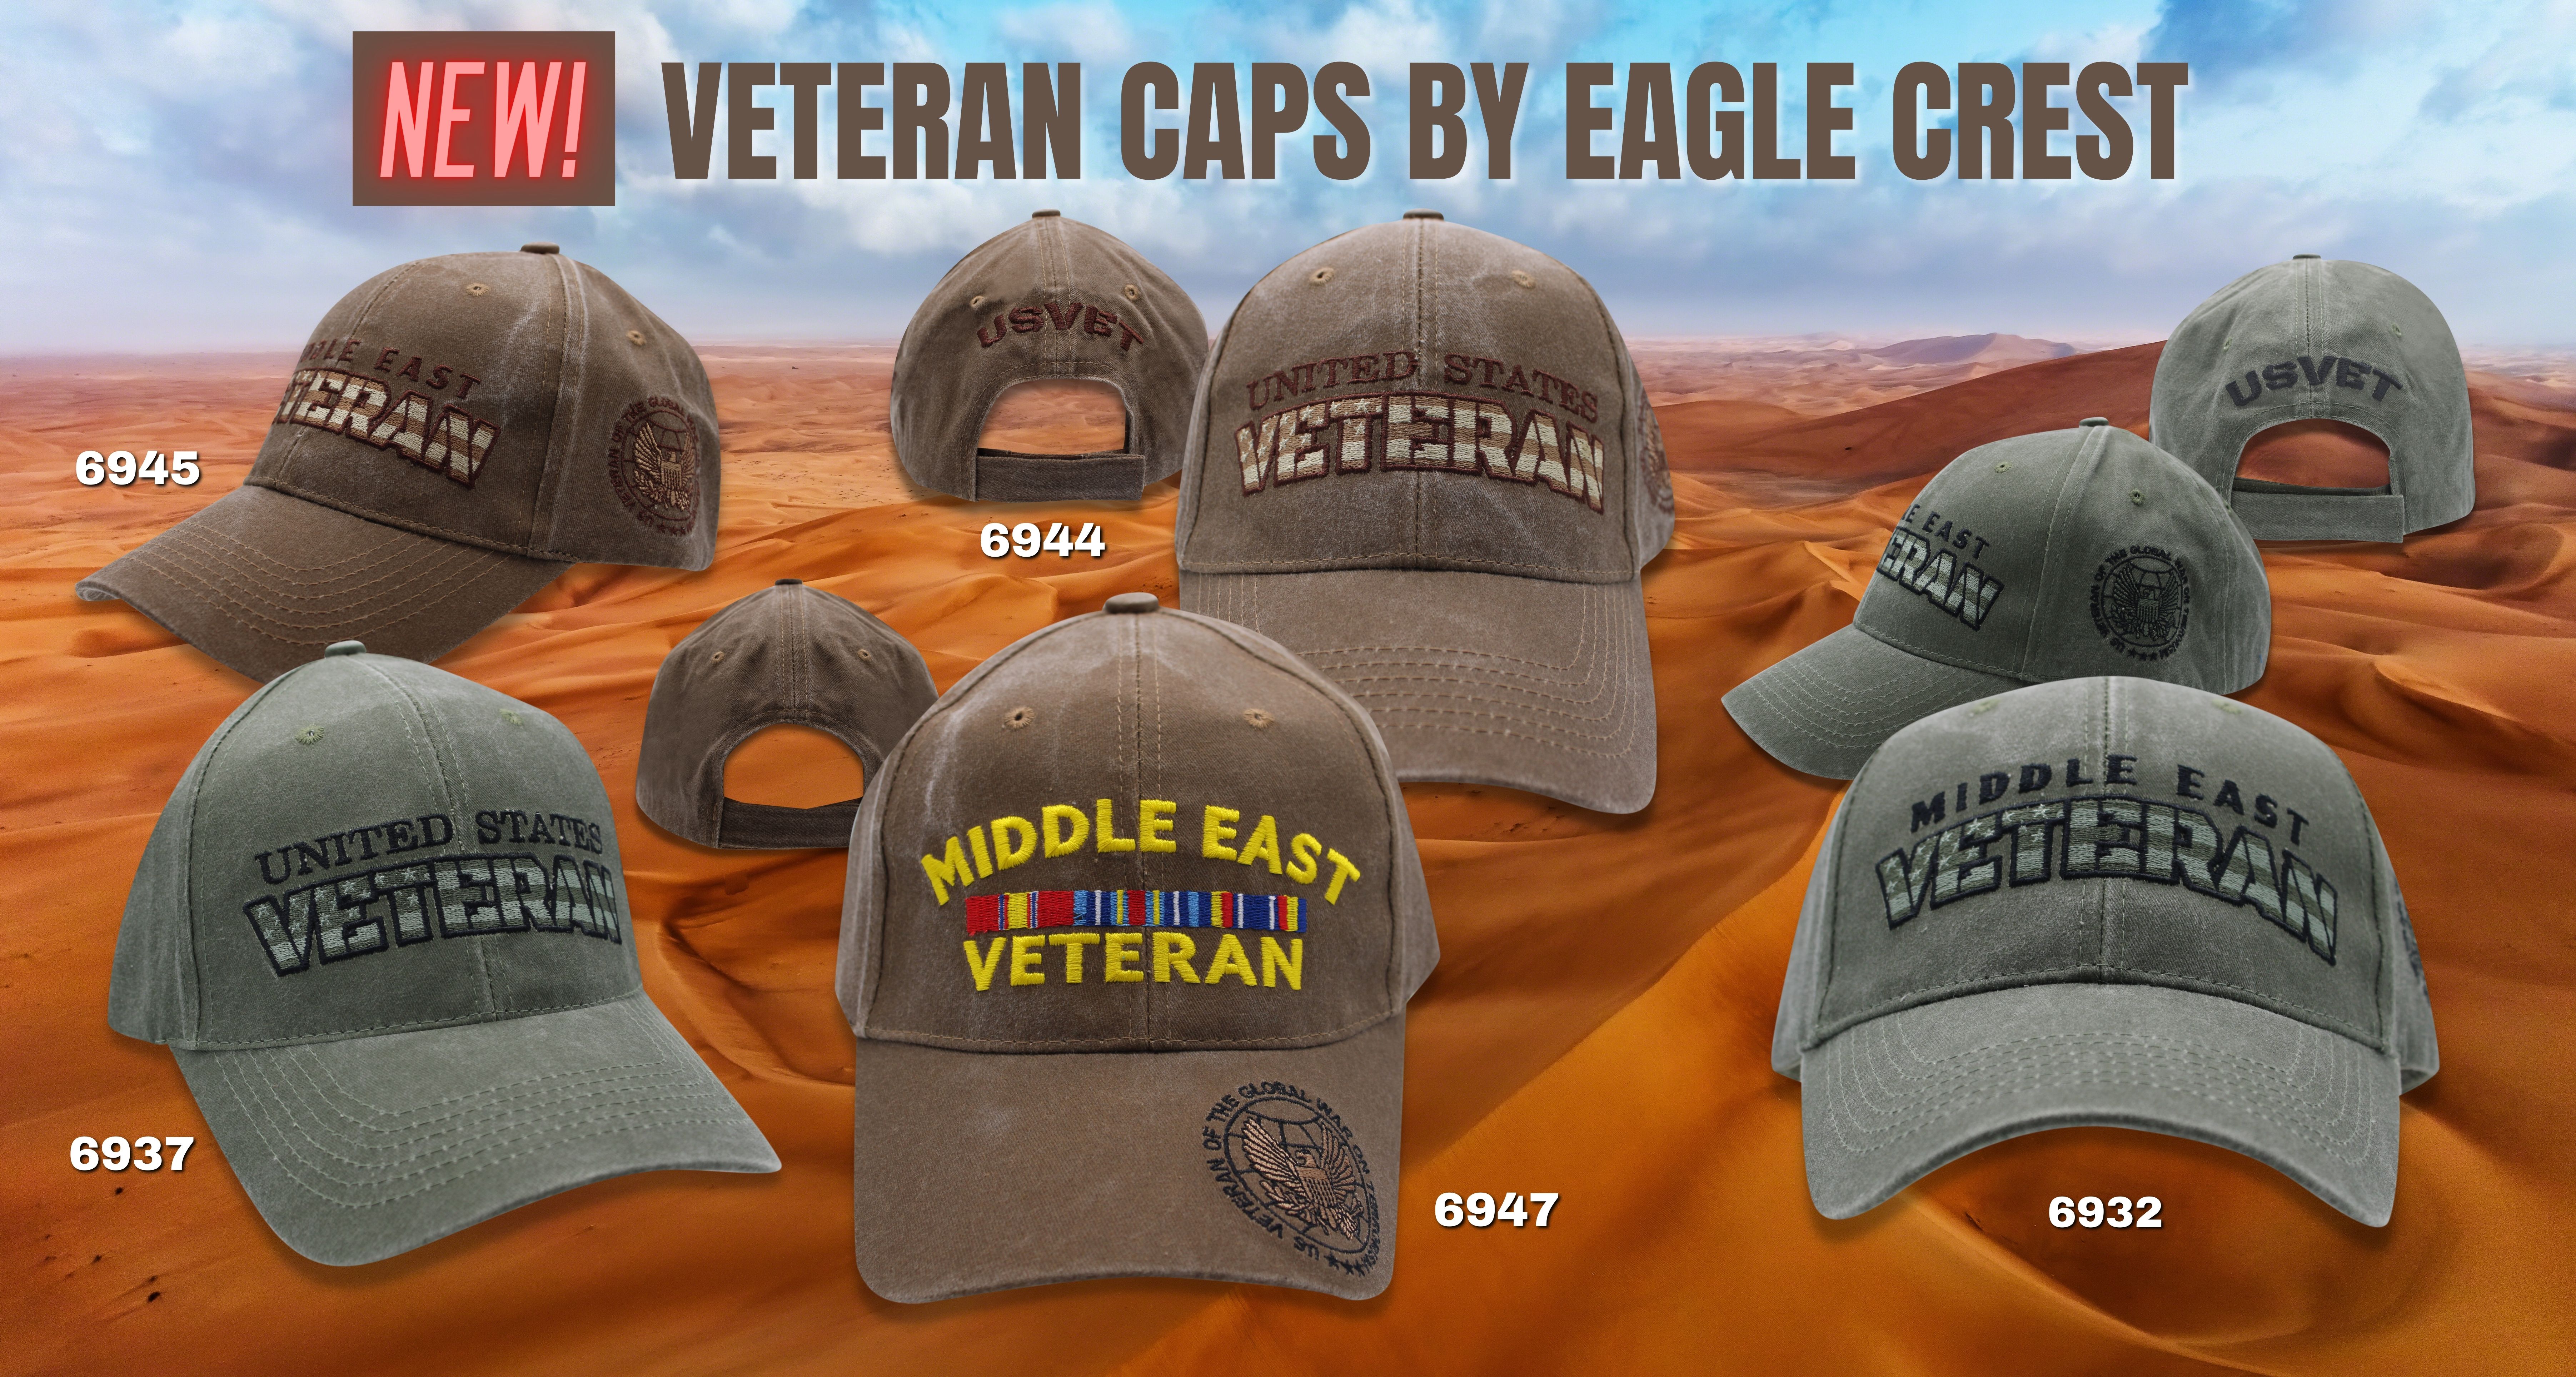 NEW Veteran Caps by Eagle Crest